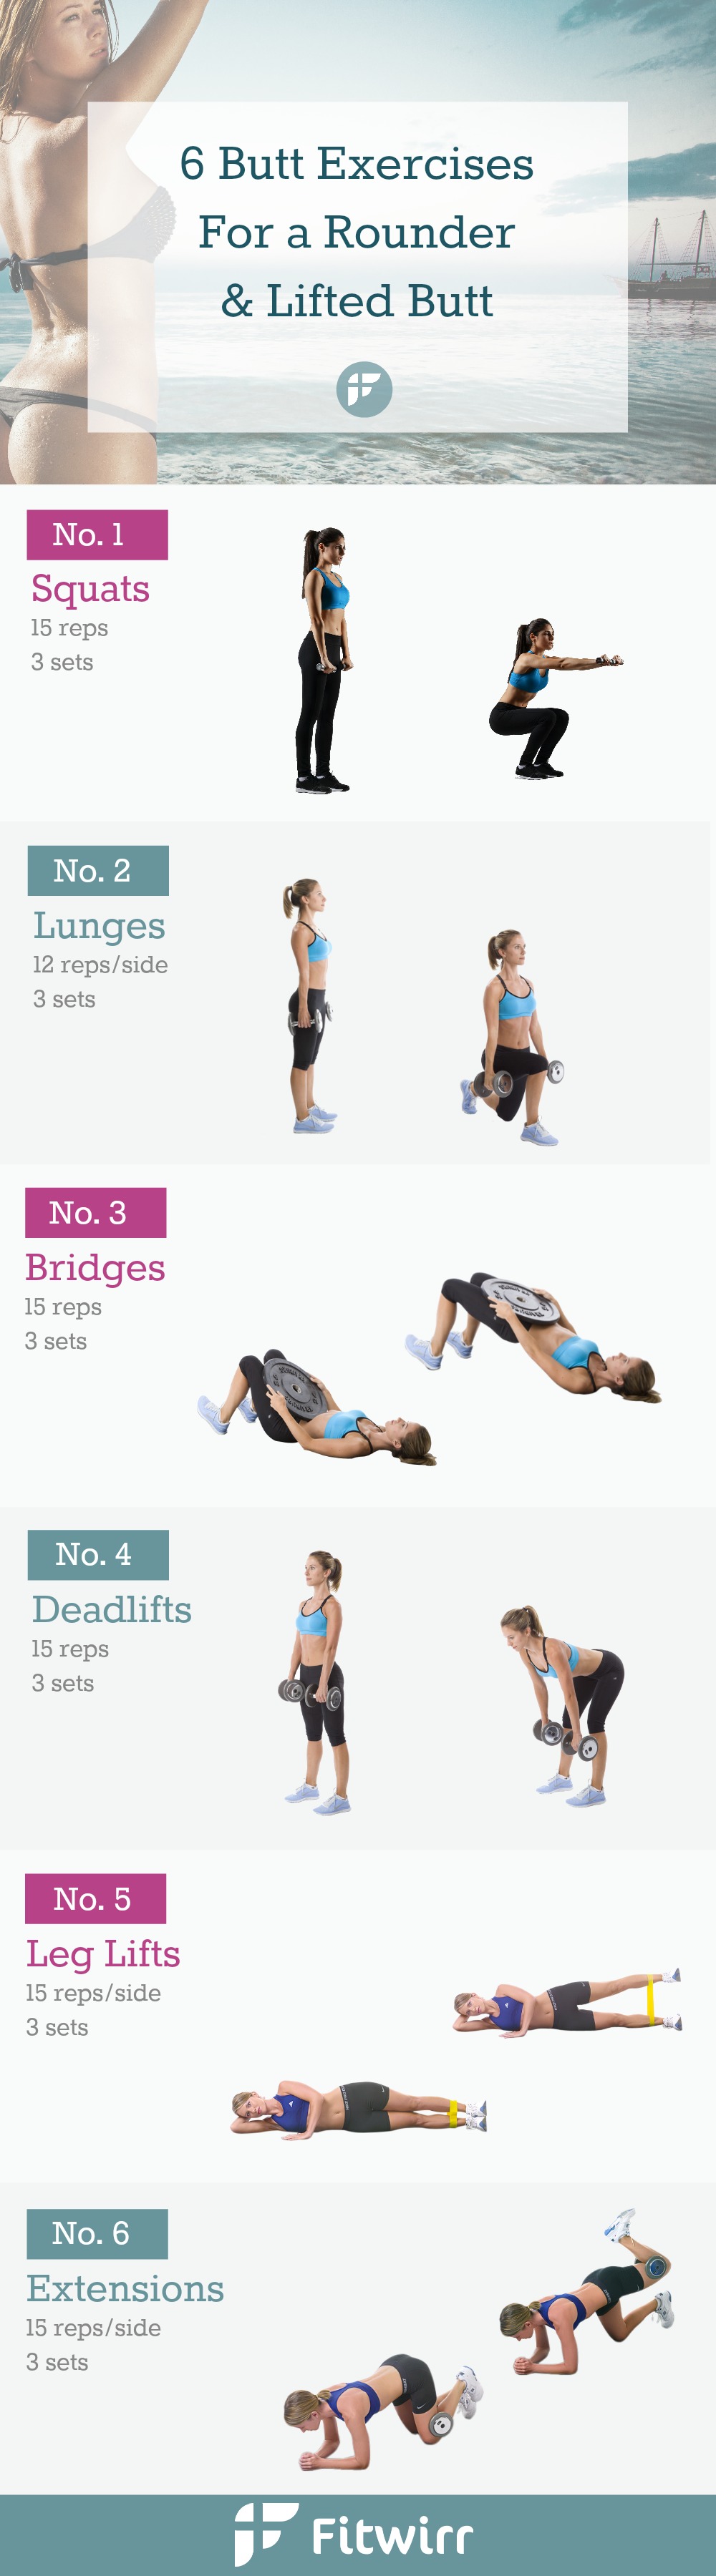 50 Intense Booty Workouts That Will Give You A Bigger, Firmer Butt! -  TrimmedandToned